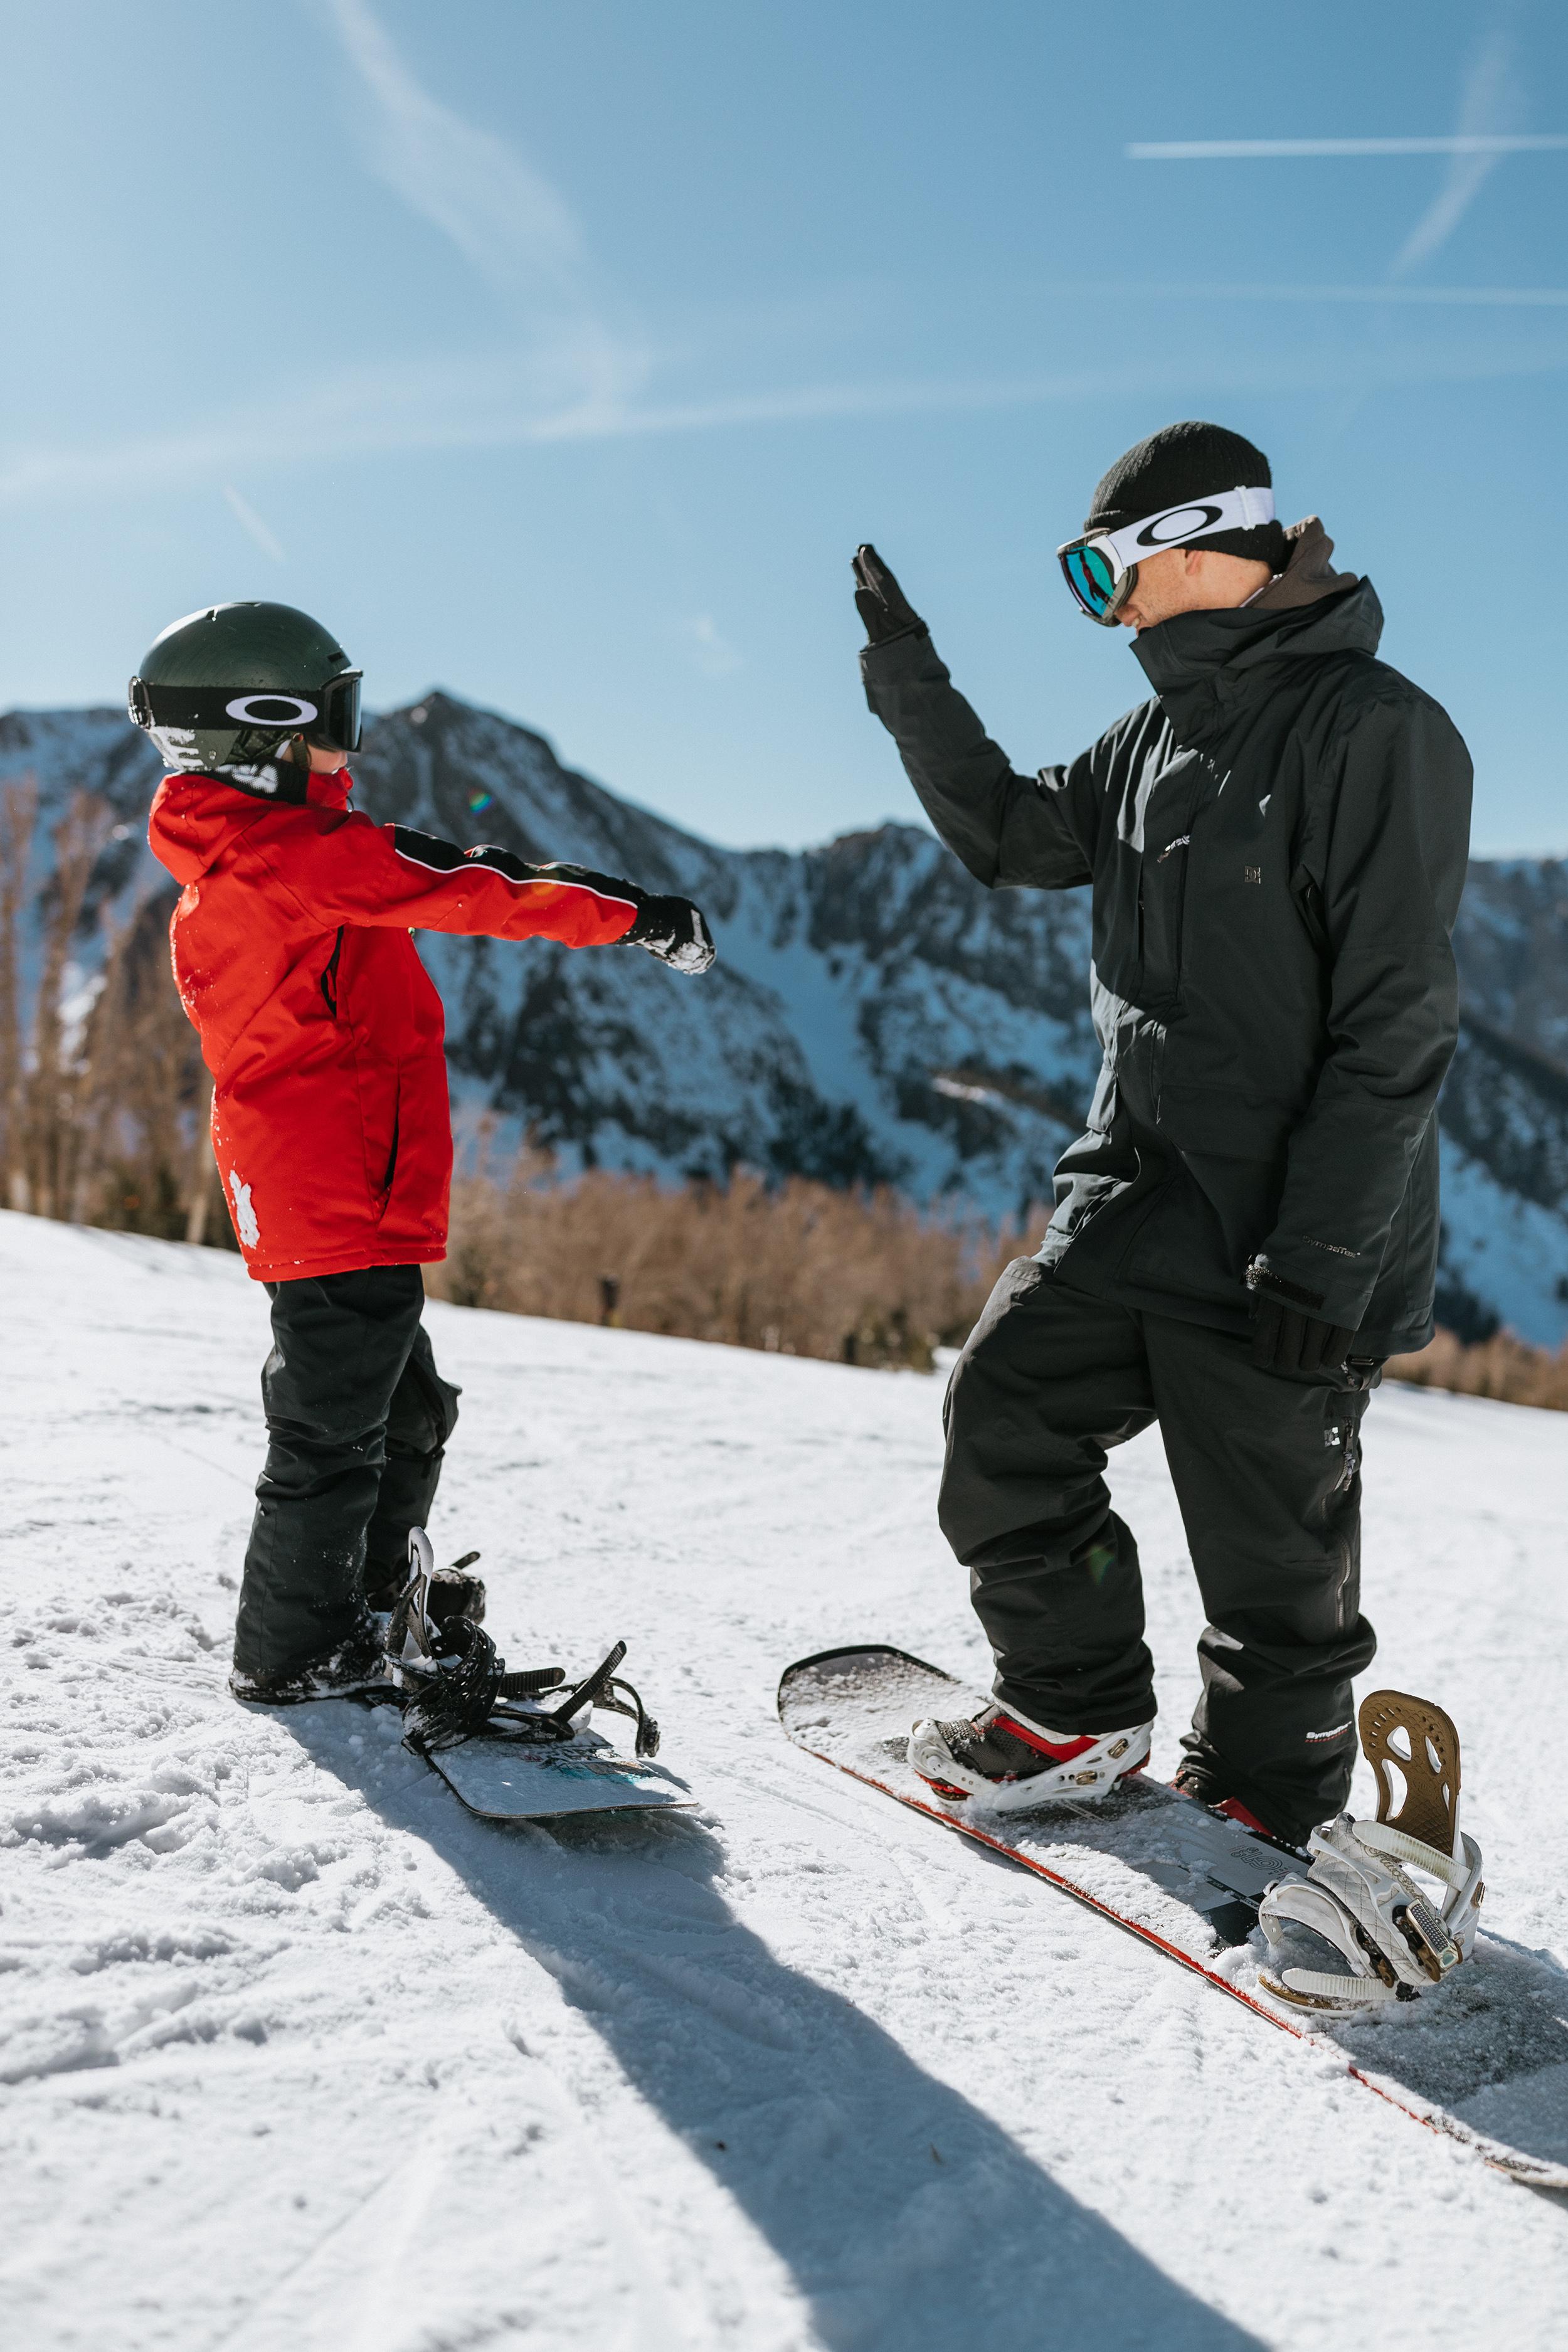 An adult and kid on snowboards giving each other a high five